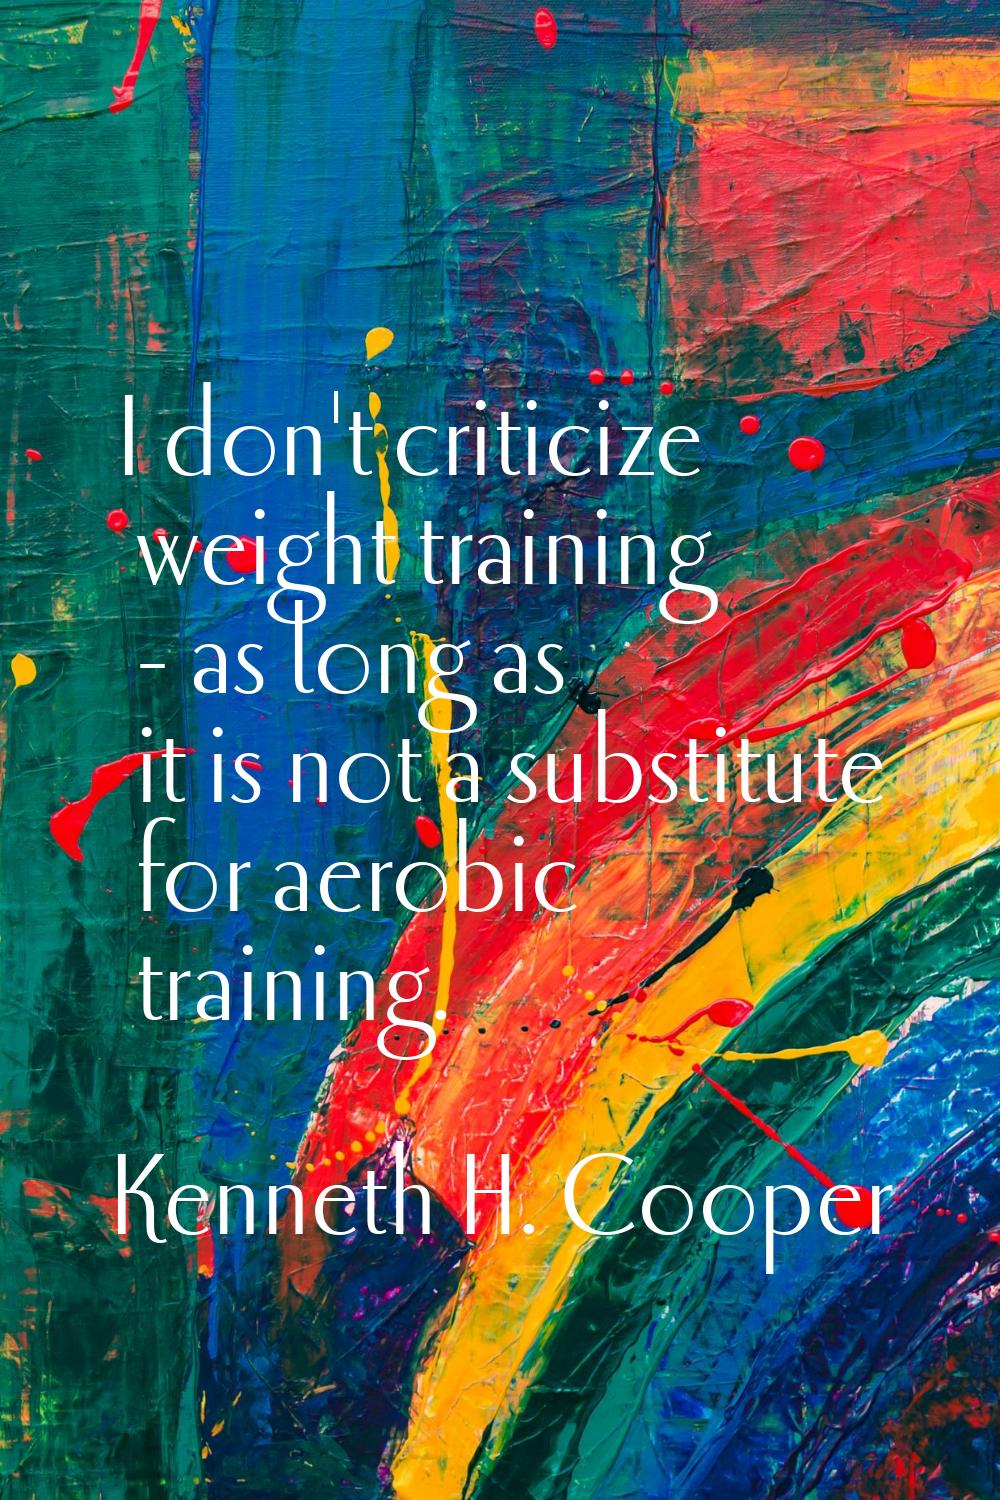 I don't criticize weight training - as long as it is not a substitute for aerobic training.